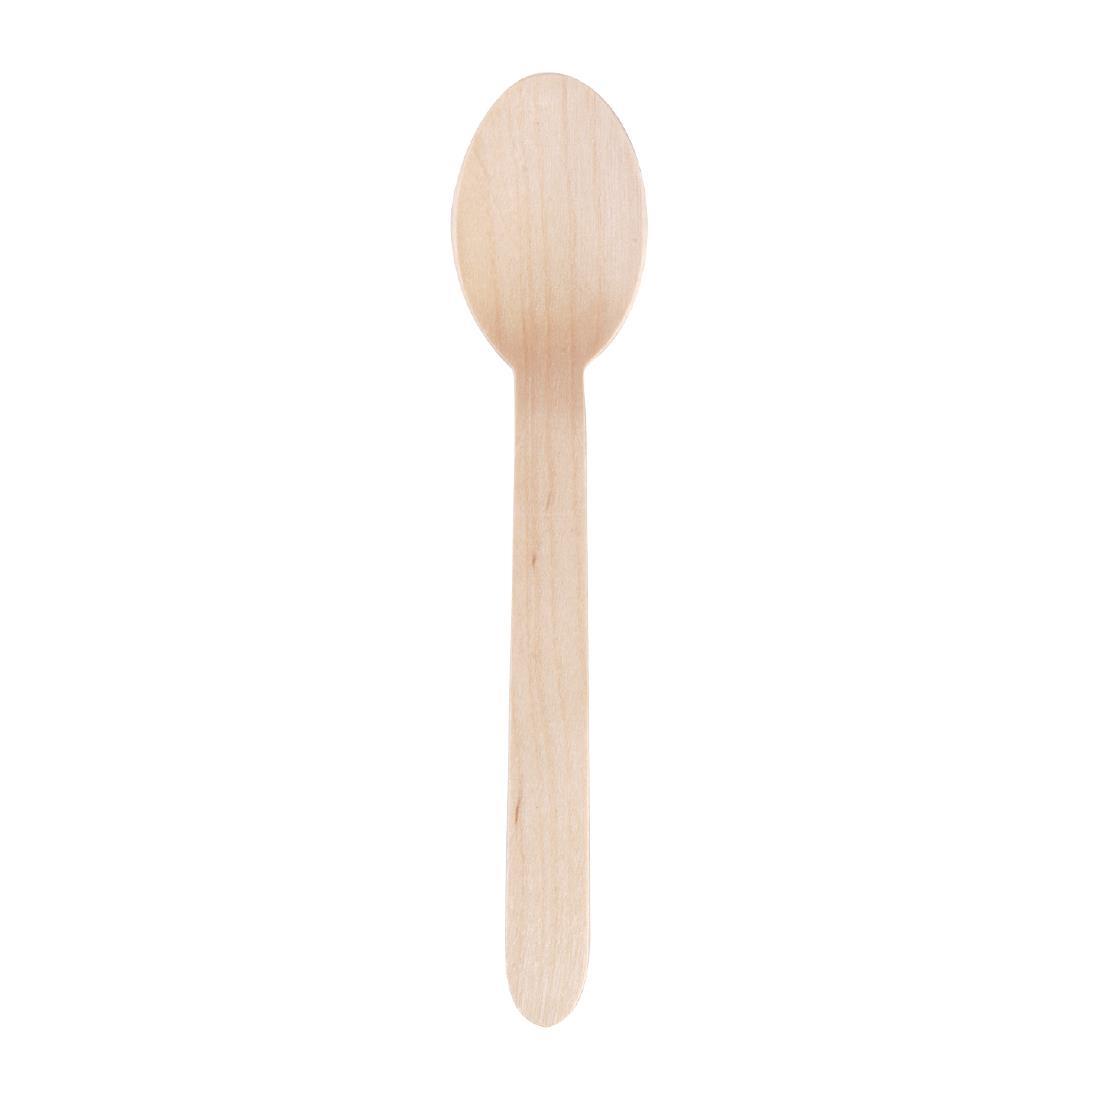 Fiesta Compostable Disposable Wooden Dessert Spoons (Pack of 100) - CD904  - 2